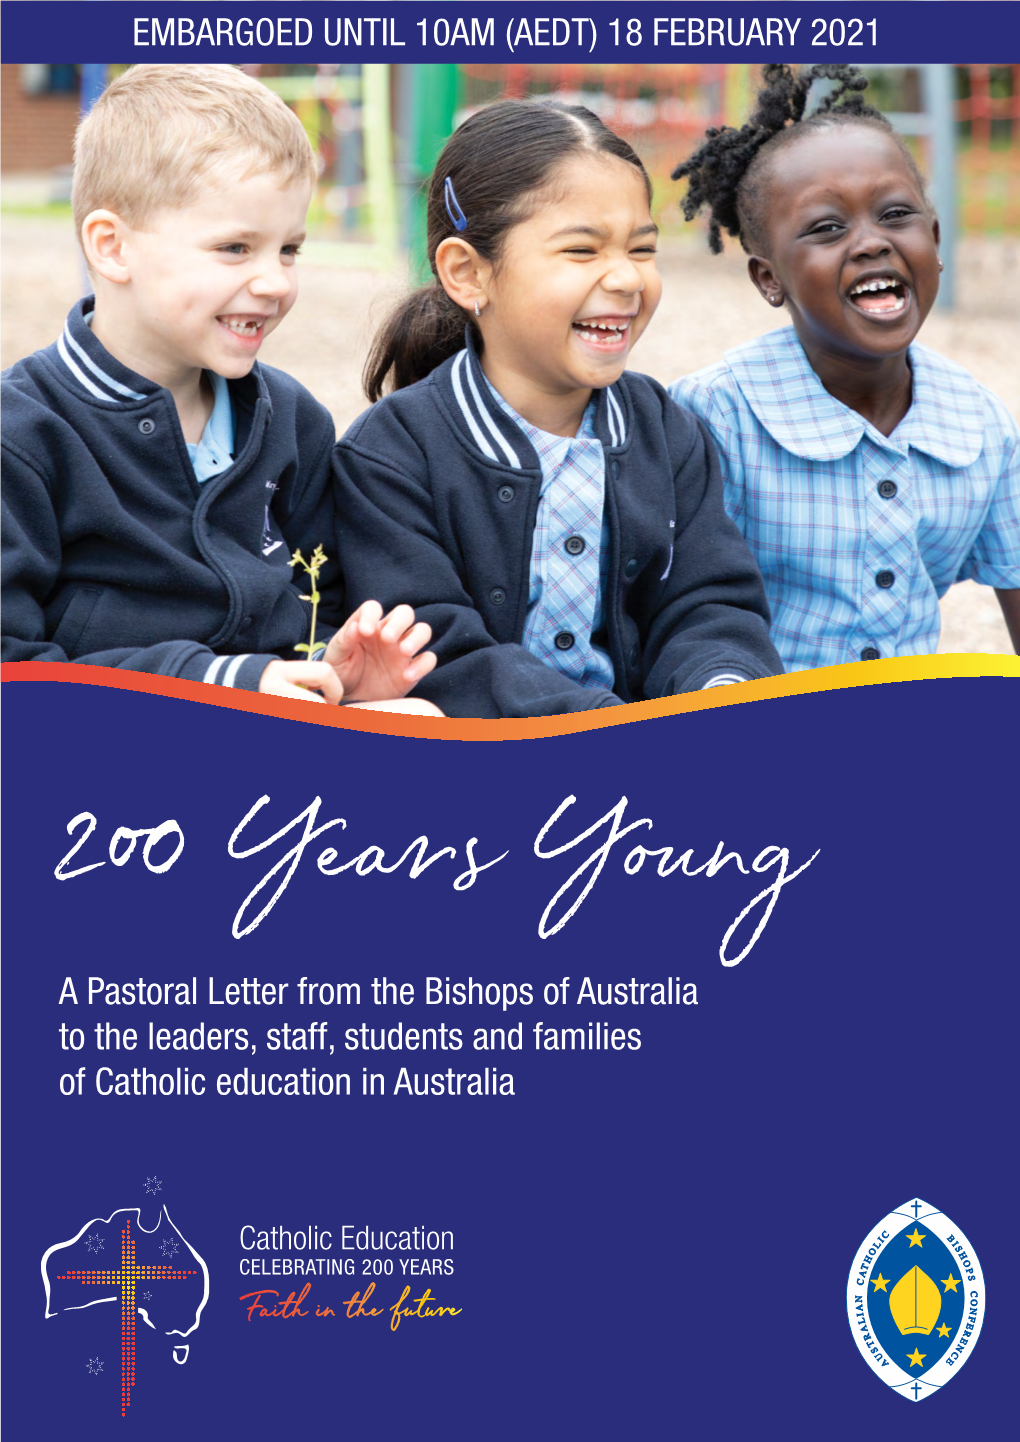 A Pastoral Letter from the Bishops of Australia to the Leaders, Staff, Students and Families of Catholic Education in Australia